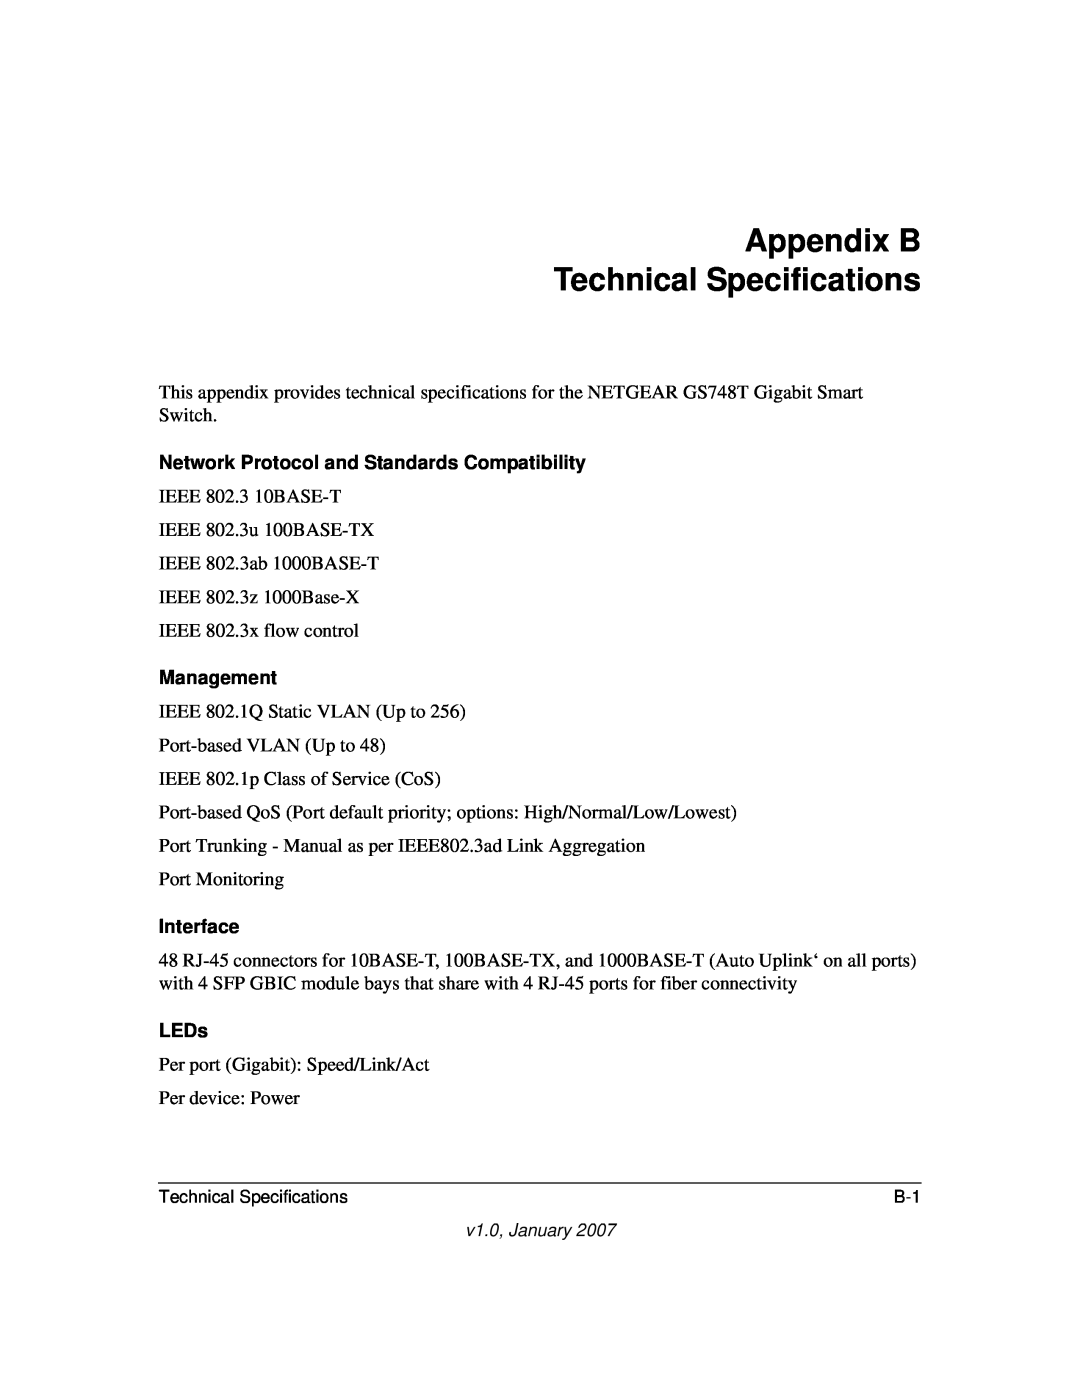 NETGEAR GS748T Appendix B Technical Specifications, Network Protocol and Standards Compatibility, Management, Interface 